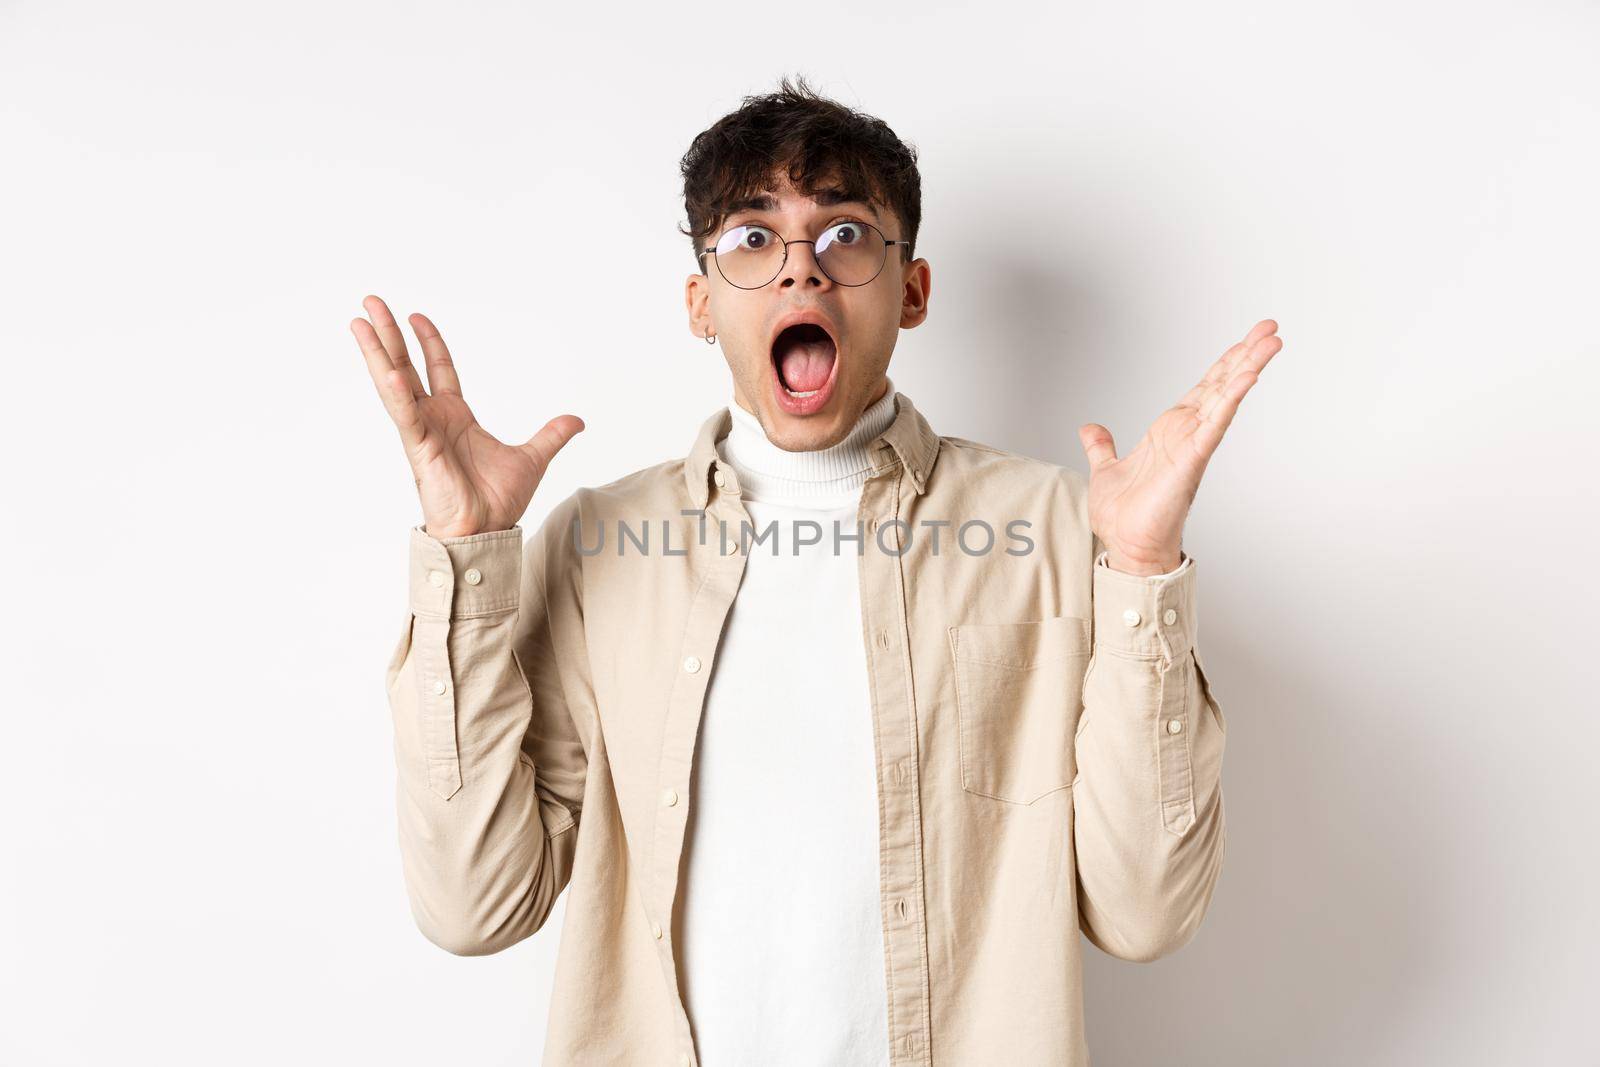 Scared young man in panic, screaming and looking axious, jumping startled and shocked, shaking hands nervously, standing on white background.